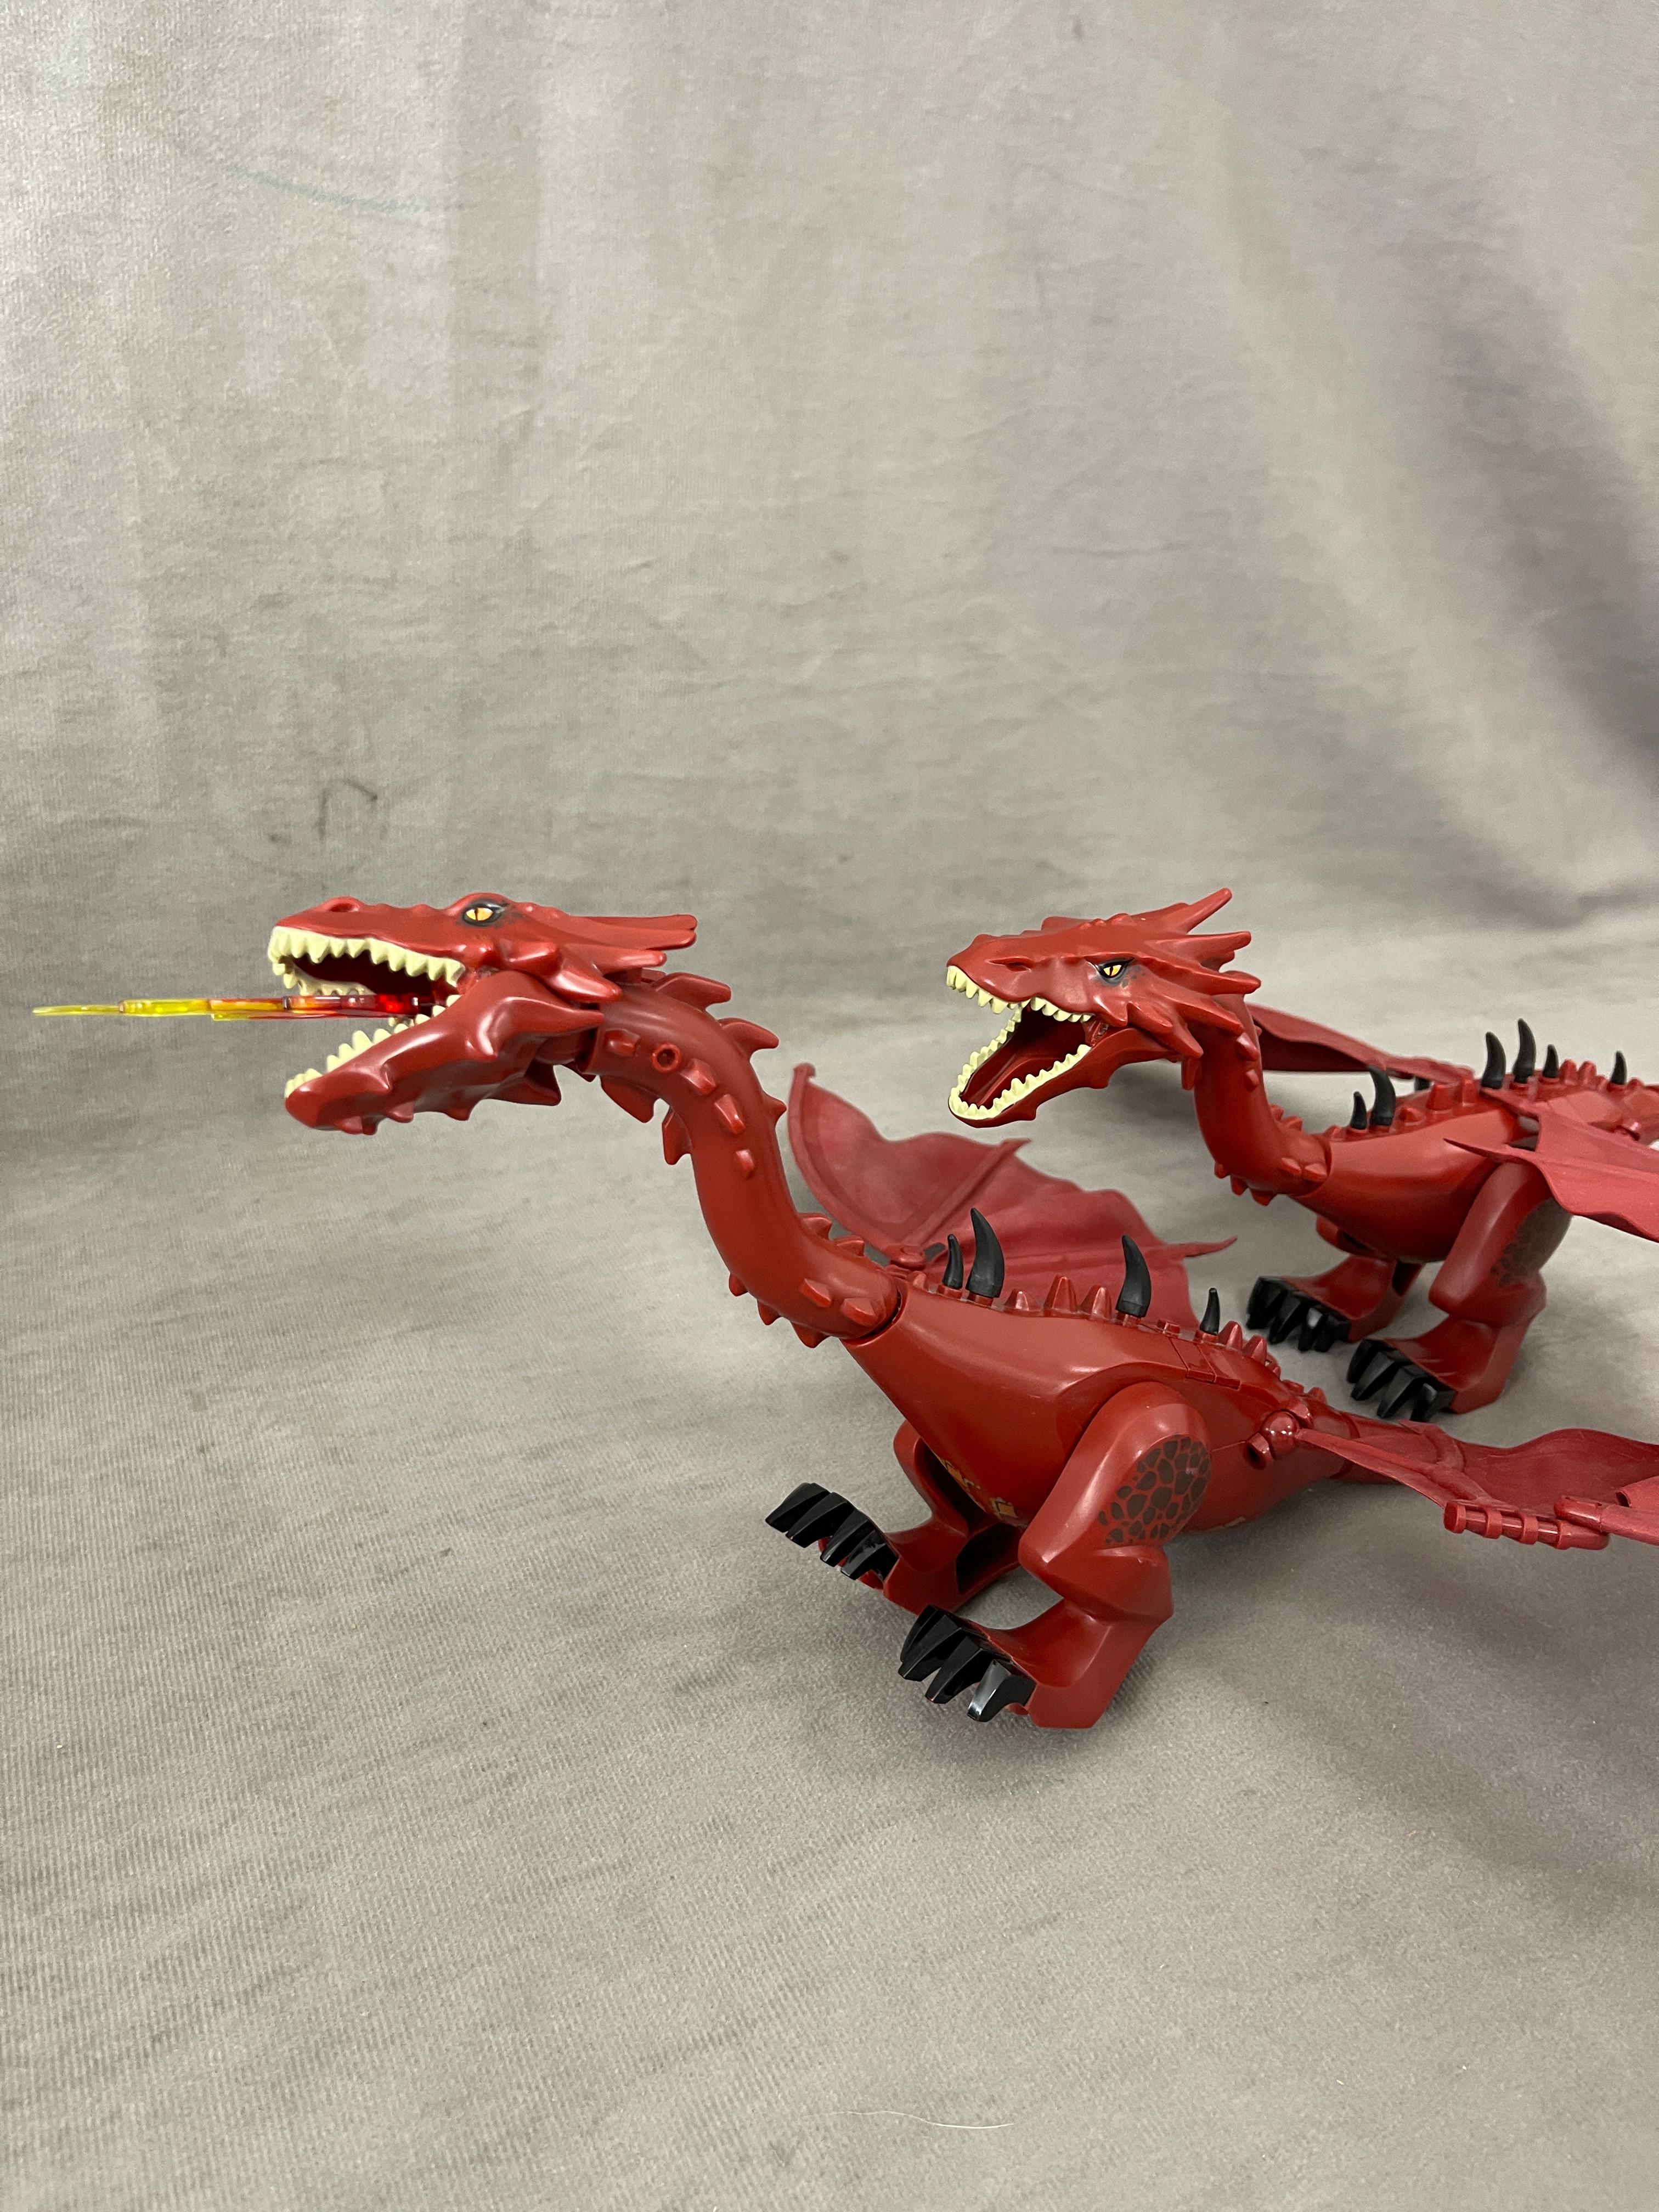 LEGO Smaug Dragon Minifigure Lord of the Rings Hobbit 79018 The Lonely Mountain Lot